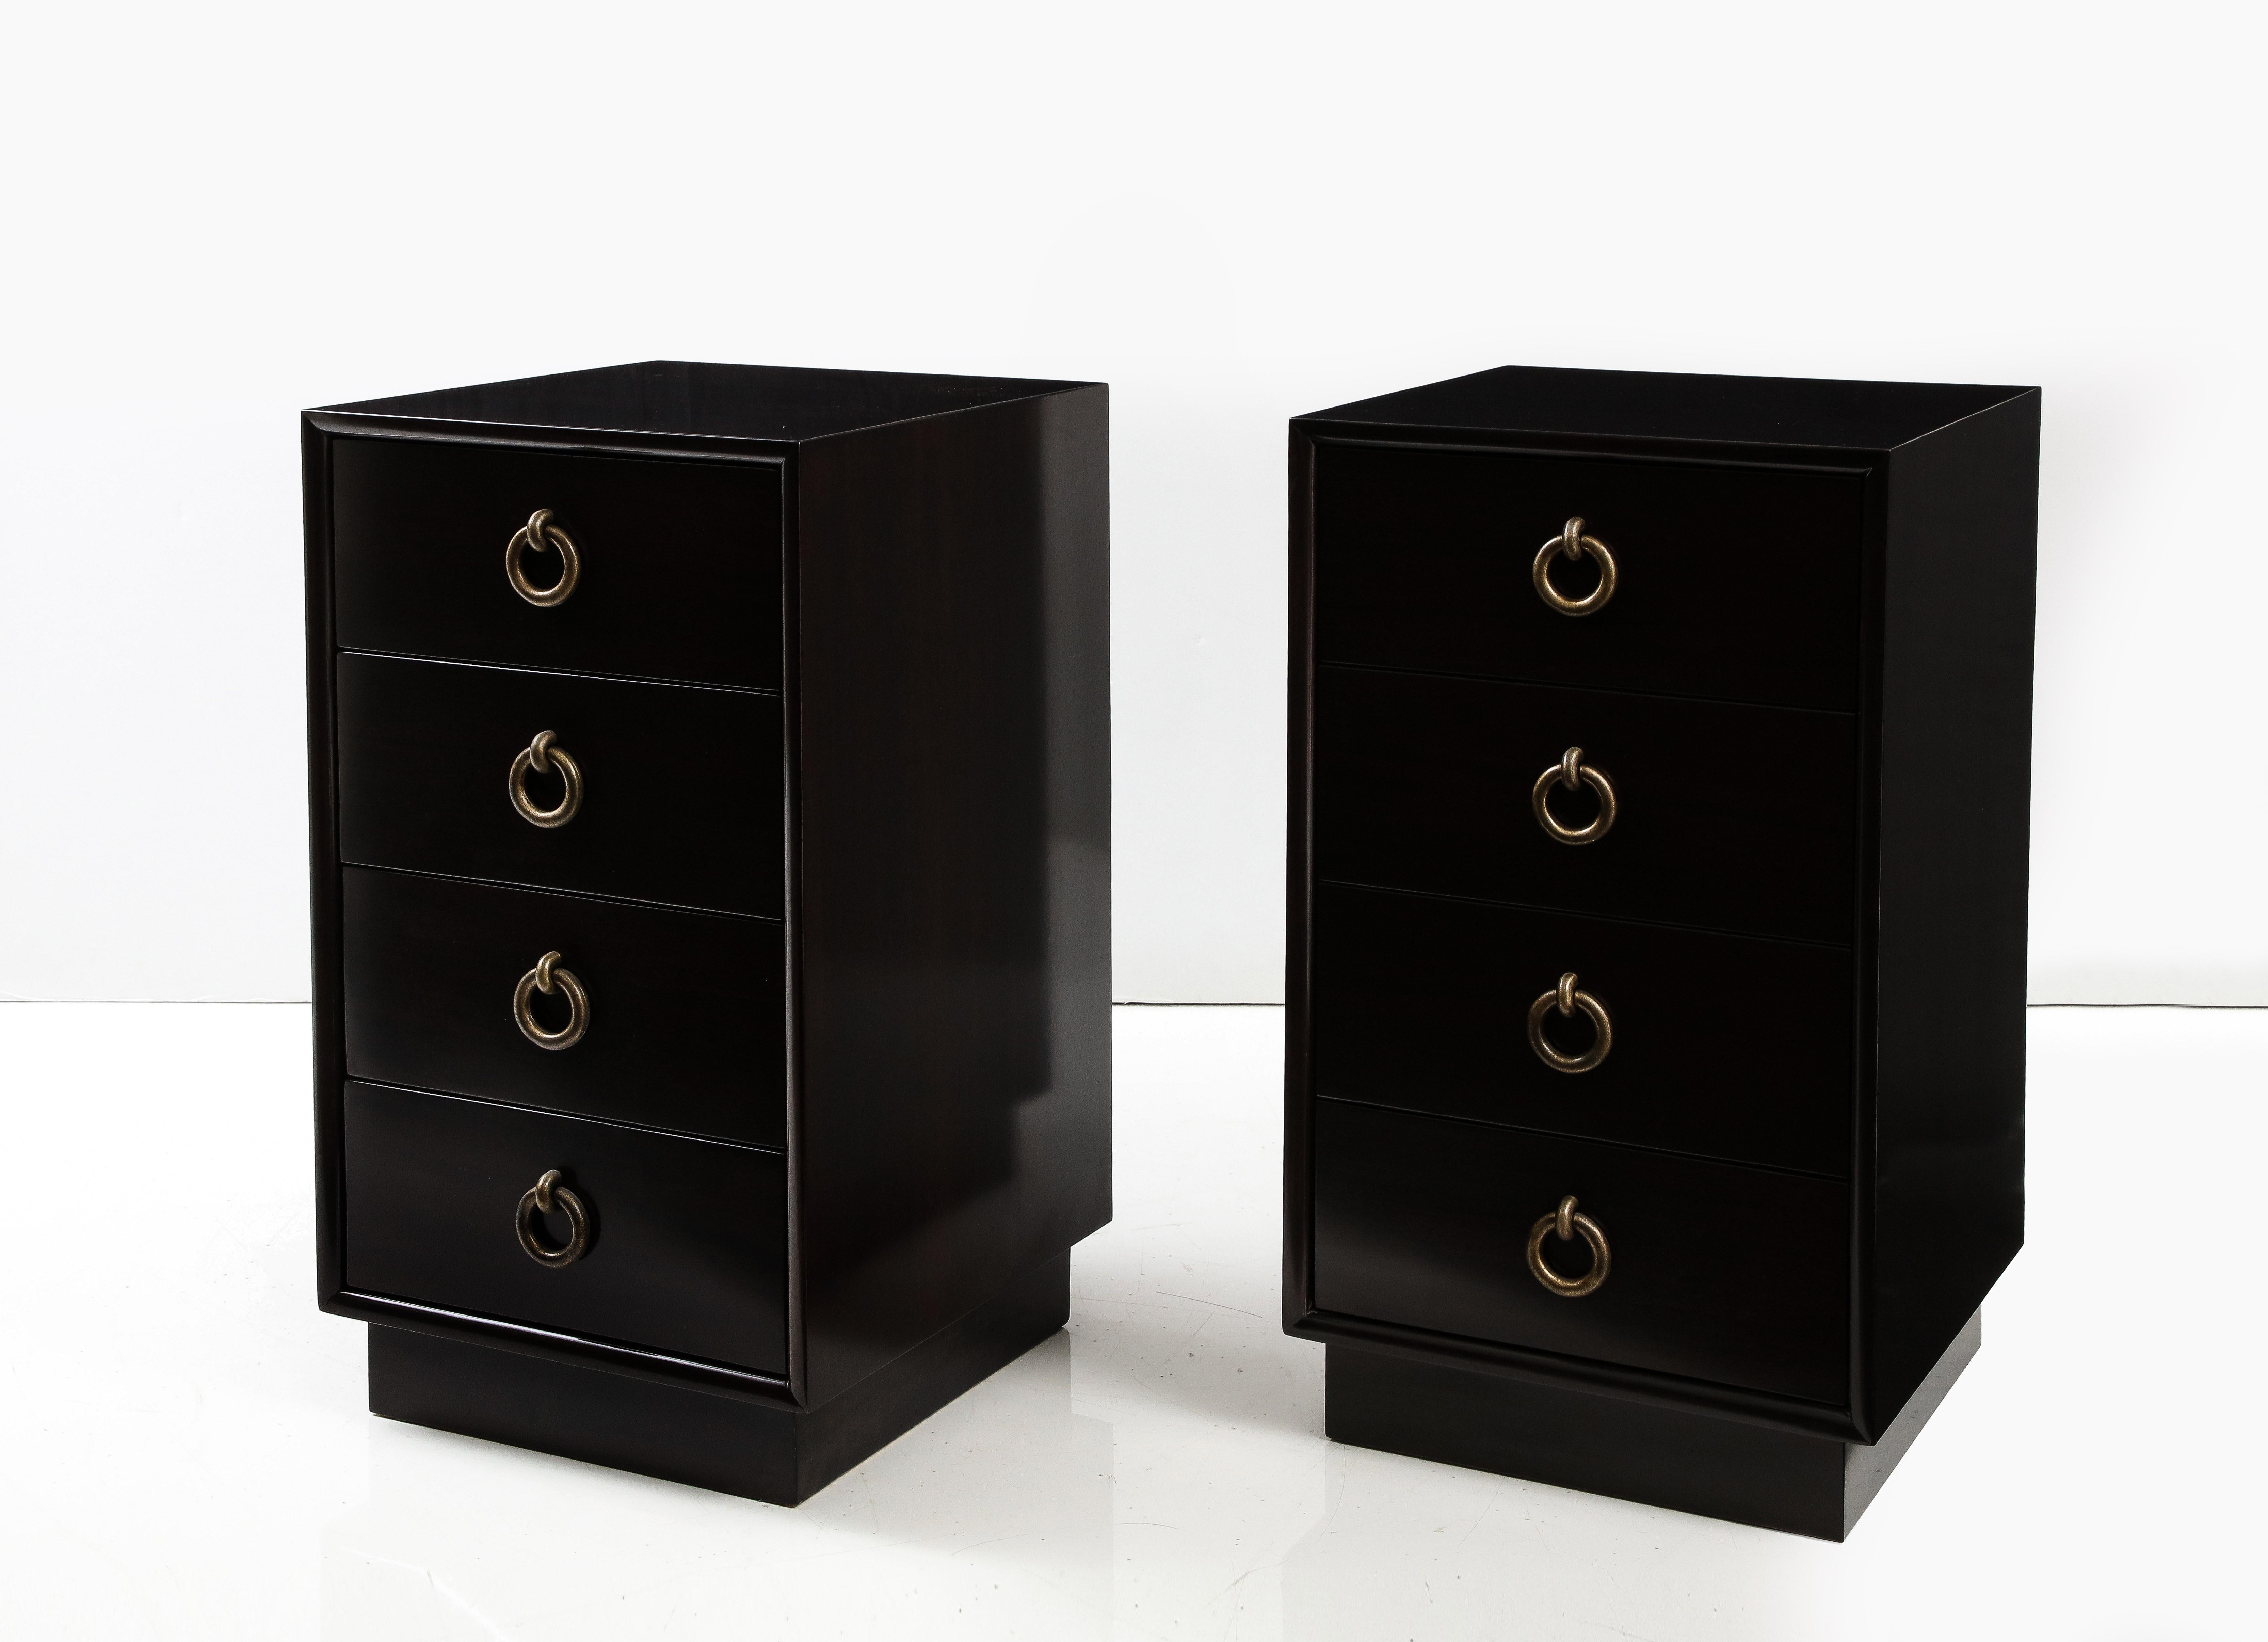 Pair of mint restored Art Deco meets Mid Century Modern nightstands in a Espresso stain finish, Nightstands feature 4 drawers with original solid hammered bronze ring pulls. 